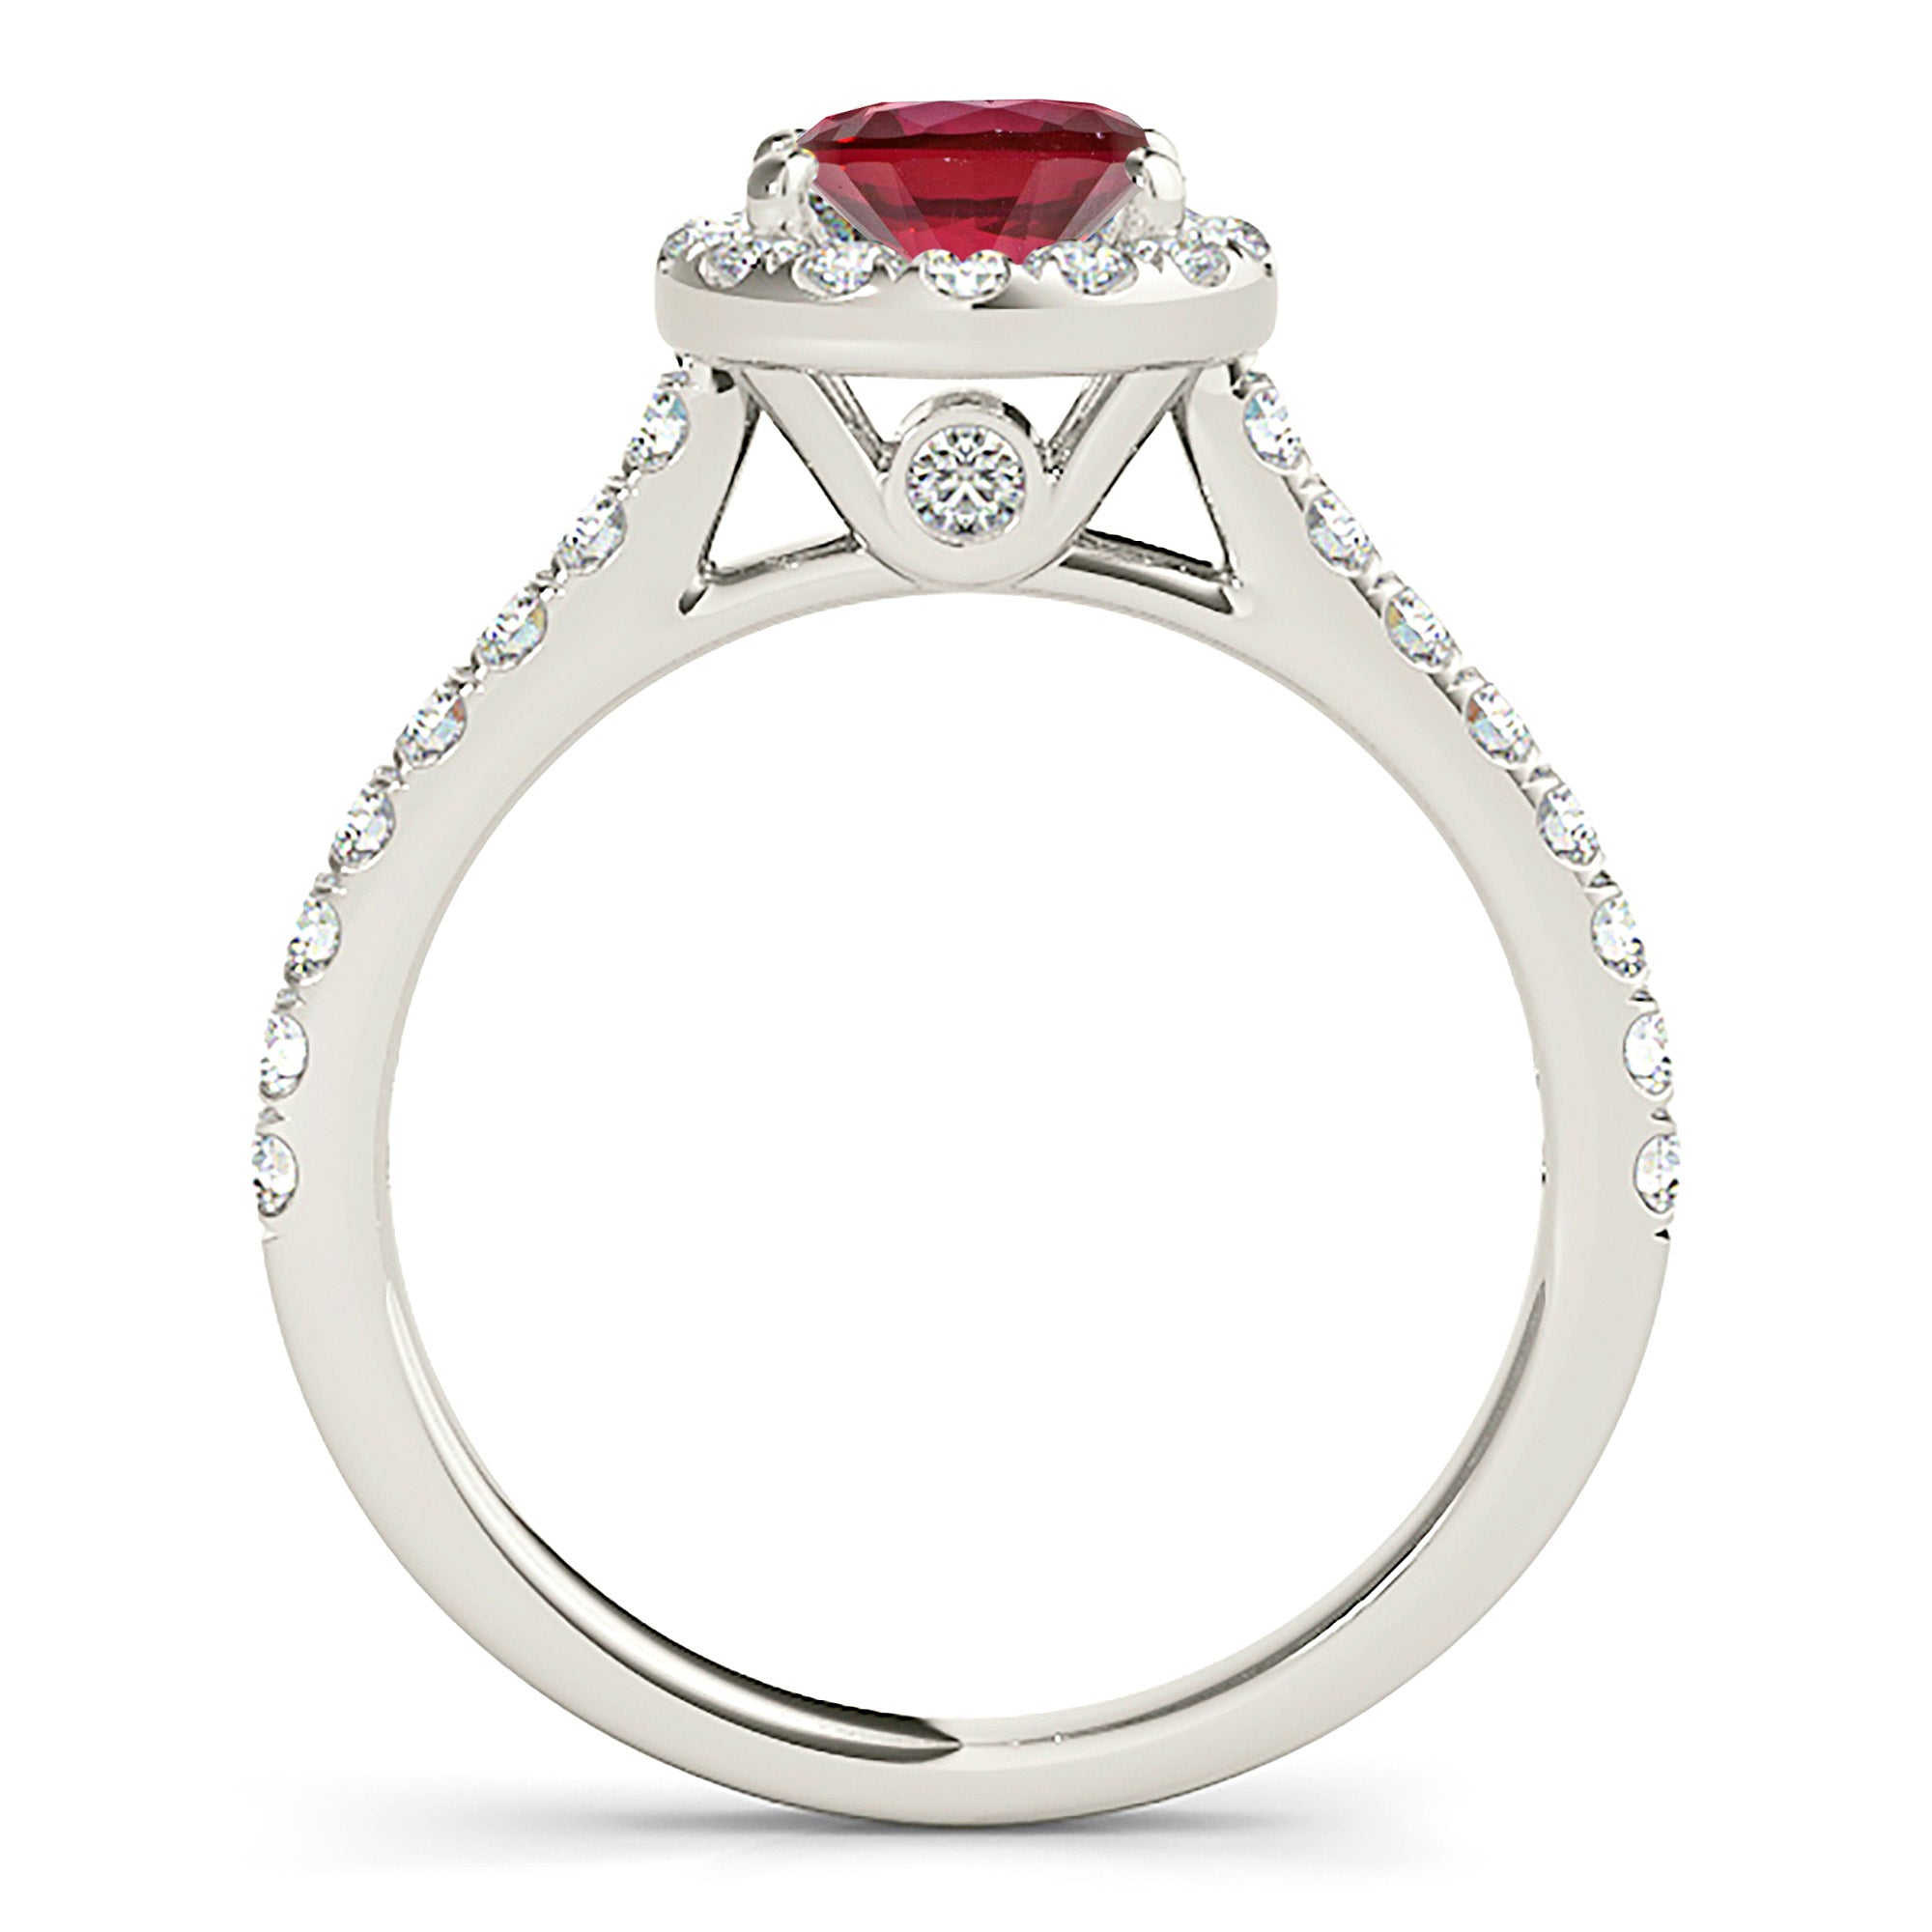 1.35 ct. Genuine Ruby Ring With 0.35 ctw. Diamond Halo , Delicate Diamond Band, Accent Diamond On Basket | Round Ruby Halo Ring | Ruby Ring-in 14K/18K White, Yellow, Rose Gold and Platinum - Christmas Jewelry Gift -VIRABYANI